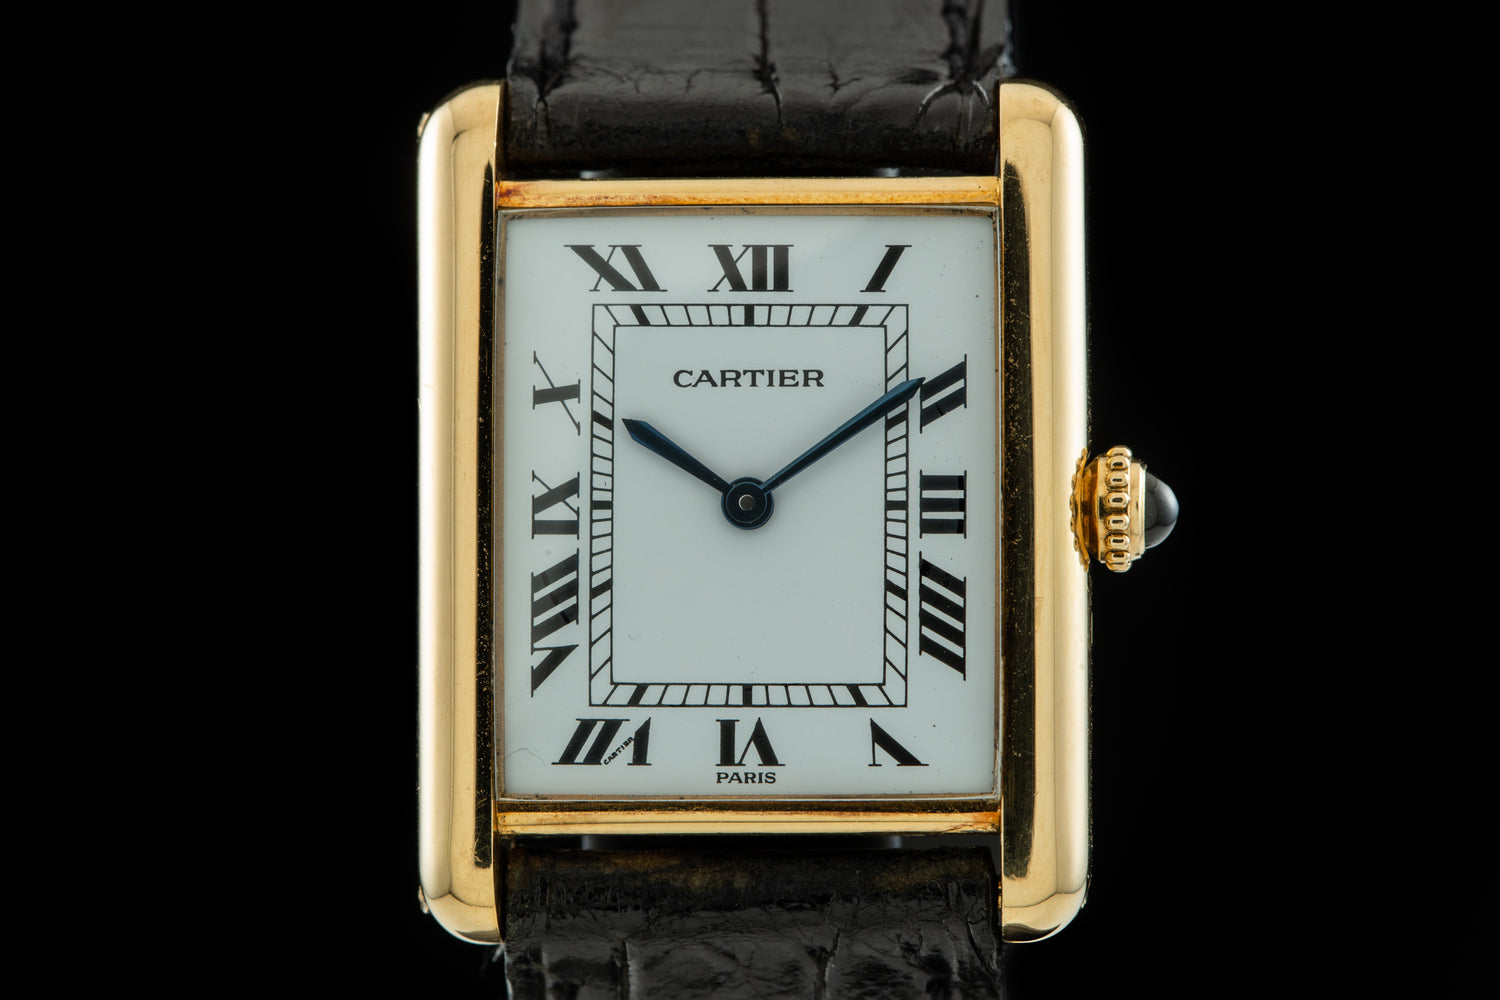 Cartier Tank Louis Paris dial complete service for $15,131 for sale from a  Seller on Chrono24